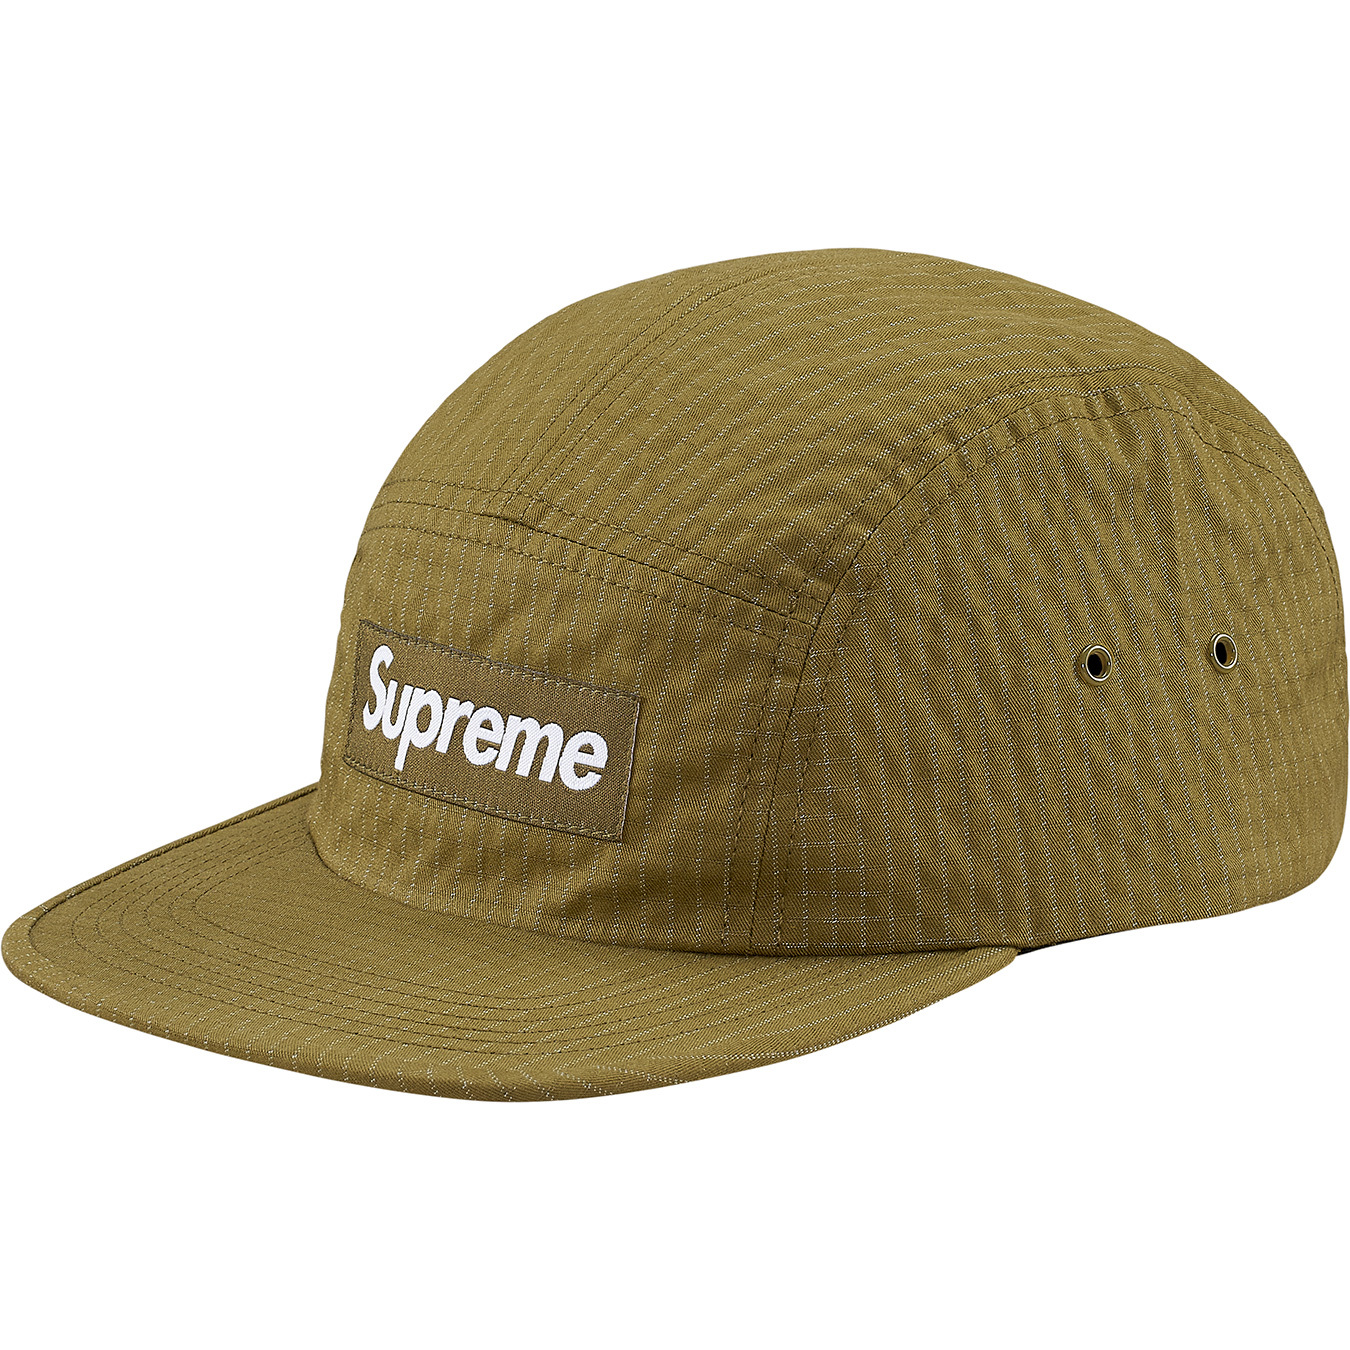 Supreme Overdyed Ripstop Camp Cap Olive - FW17 - US